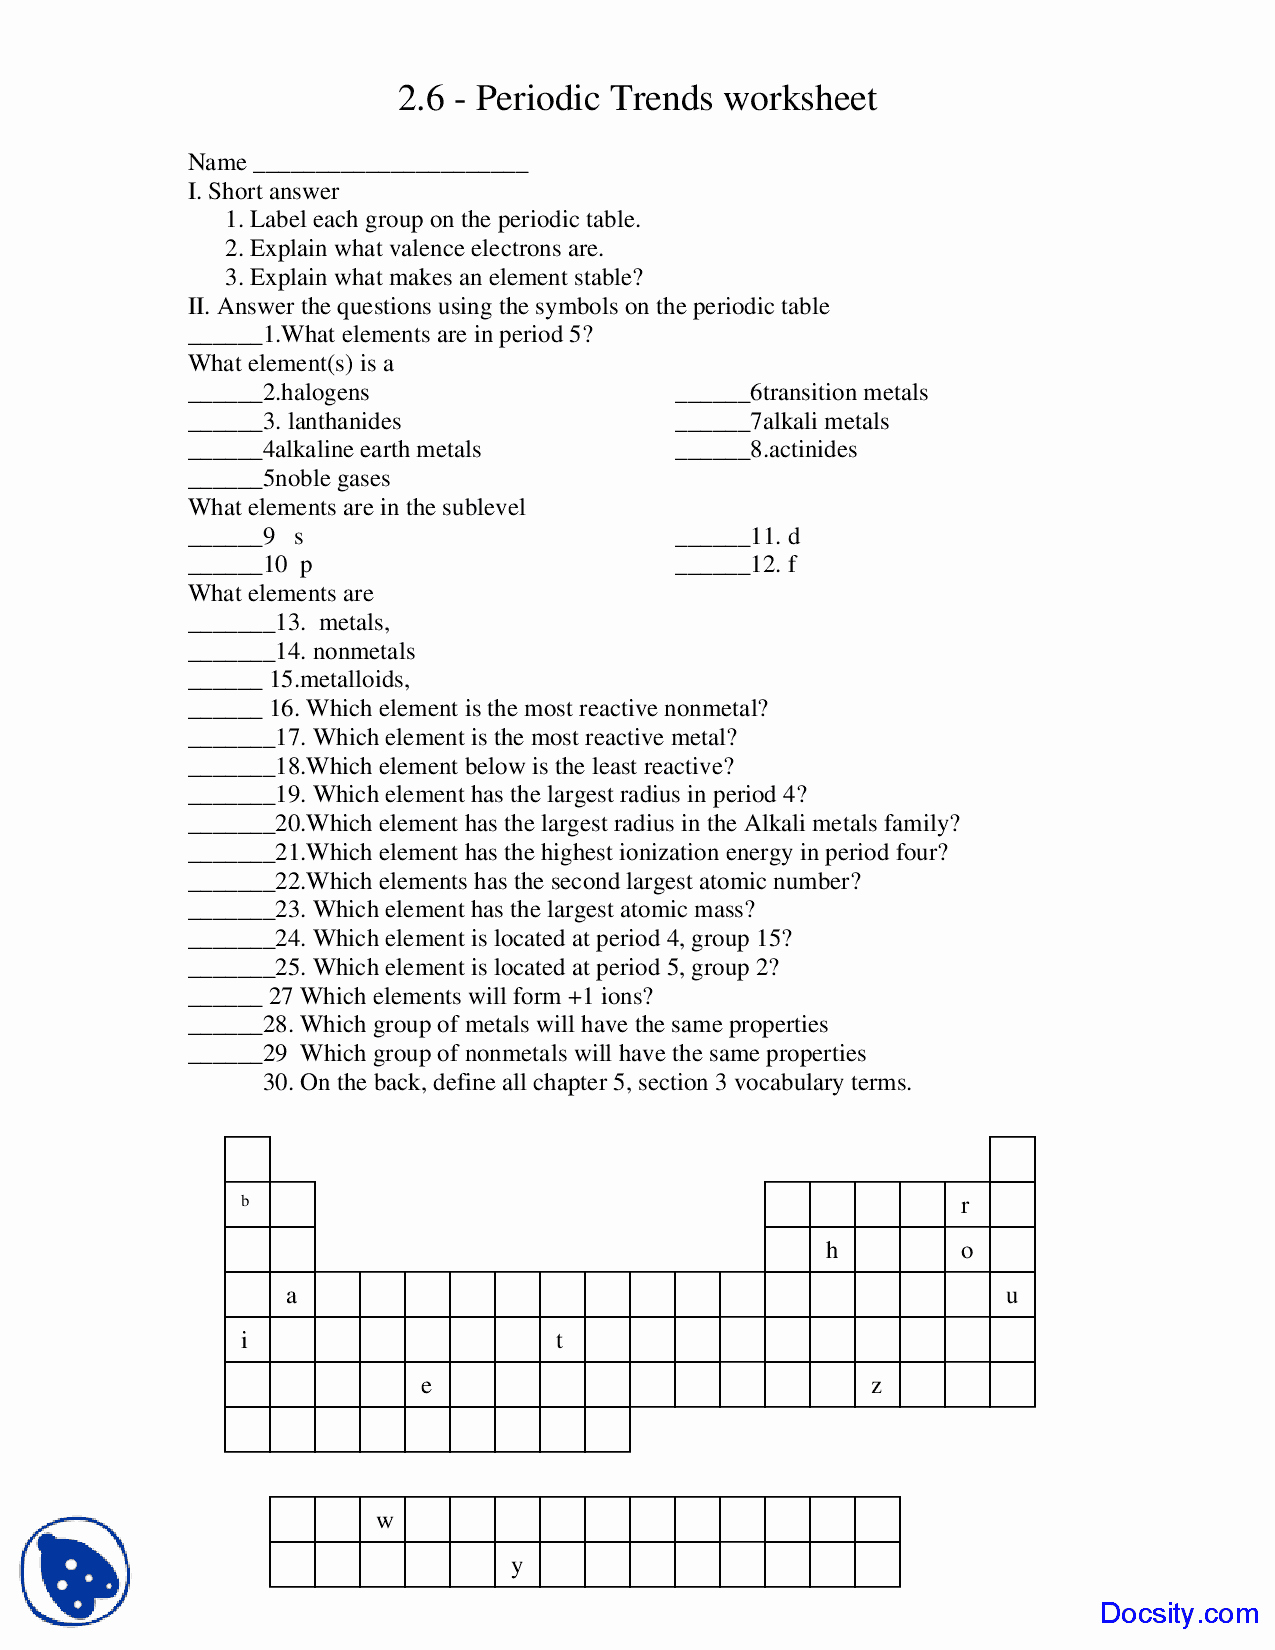 Chemistry Periodic Table Worksheet Inspirational Periodic Trends Worksheet General Chemistry Quiz Docsity